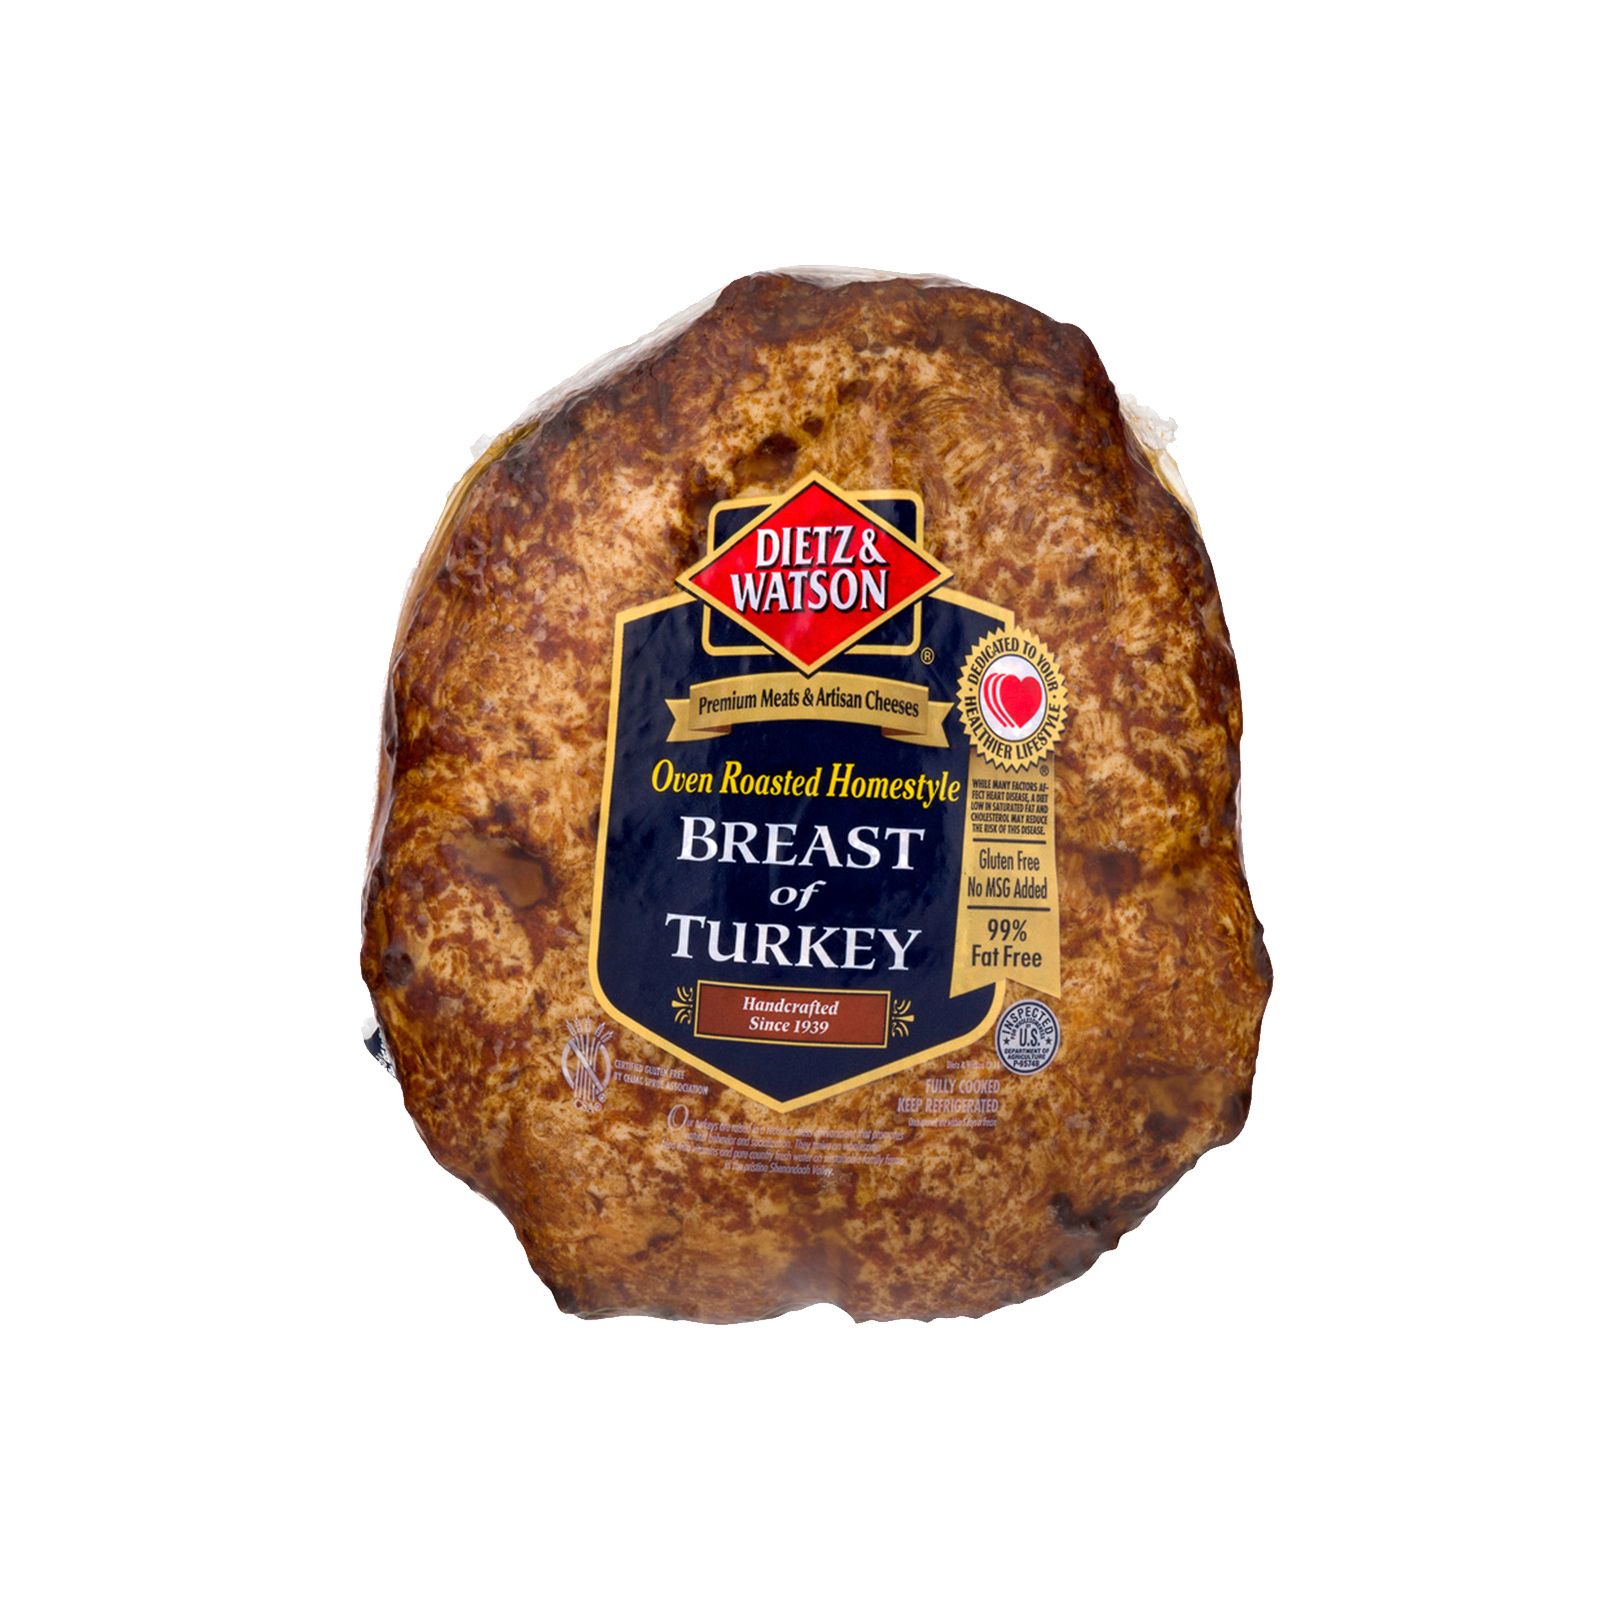 Oven-Roasted Homestyle Turkey Breast, 0.75-1.5 lbs. PS